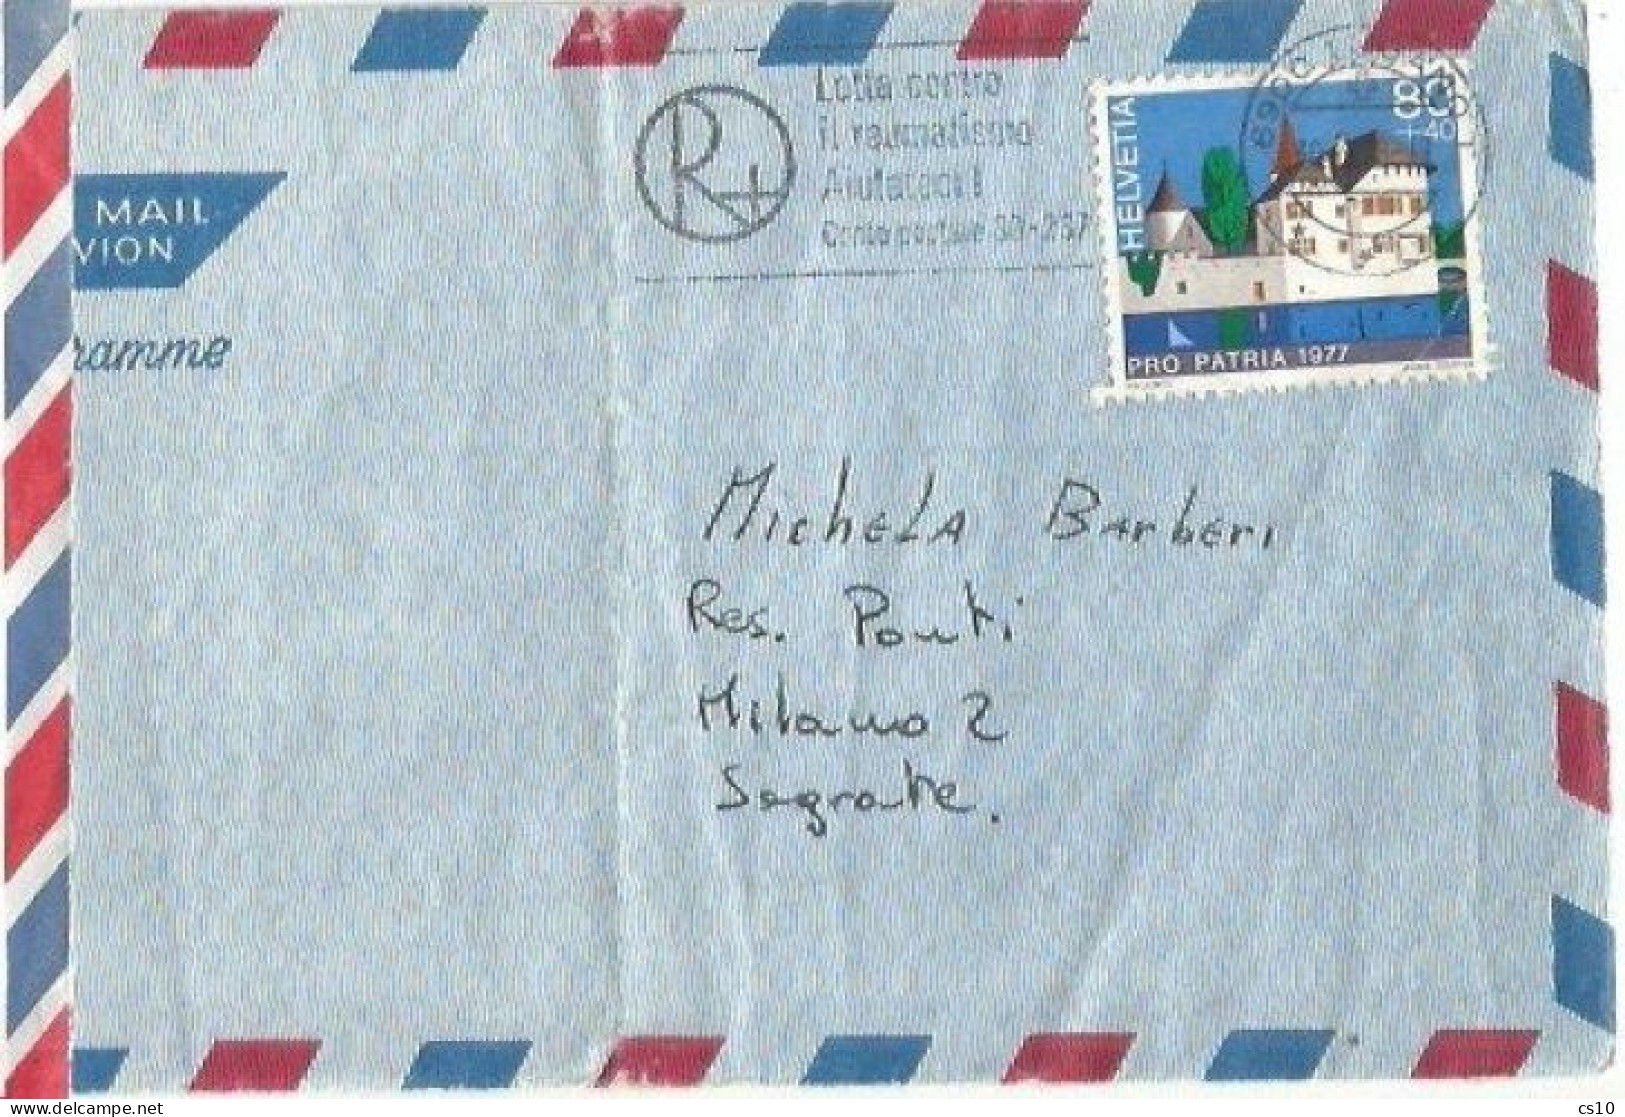 Suisse Airmail Cover Lugano 30aug1978 To Italy With ProPatria 1977 C.80+40 Solo Franking - Marcophilie